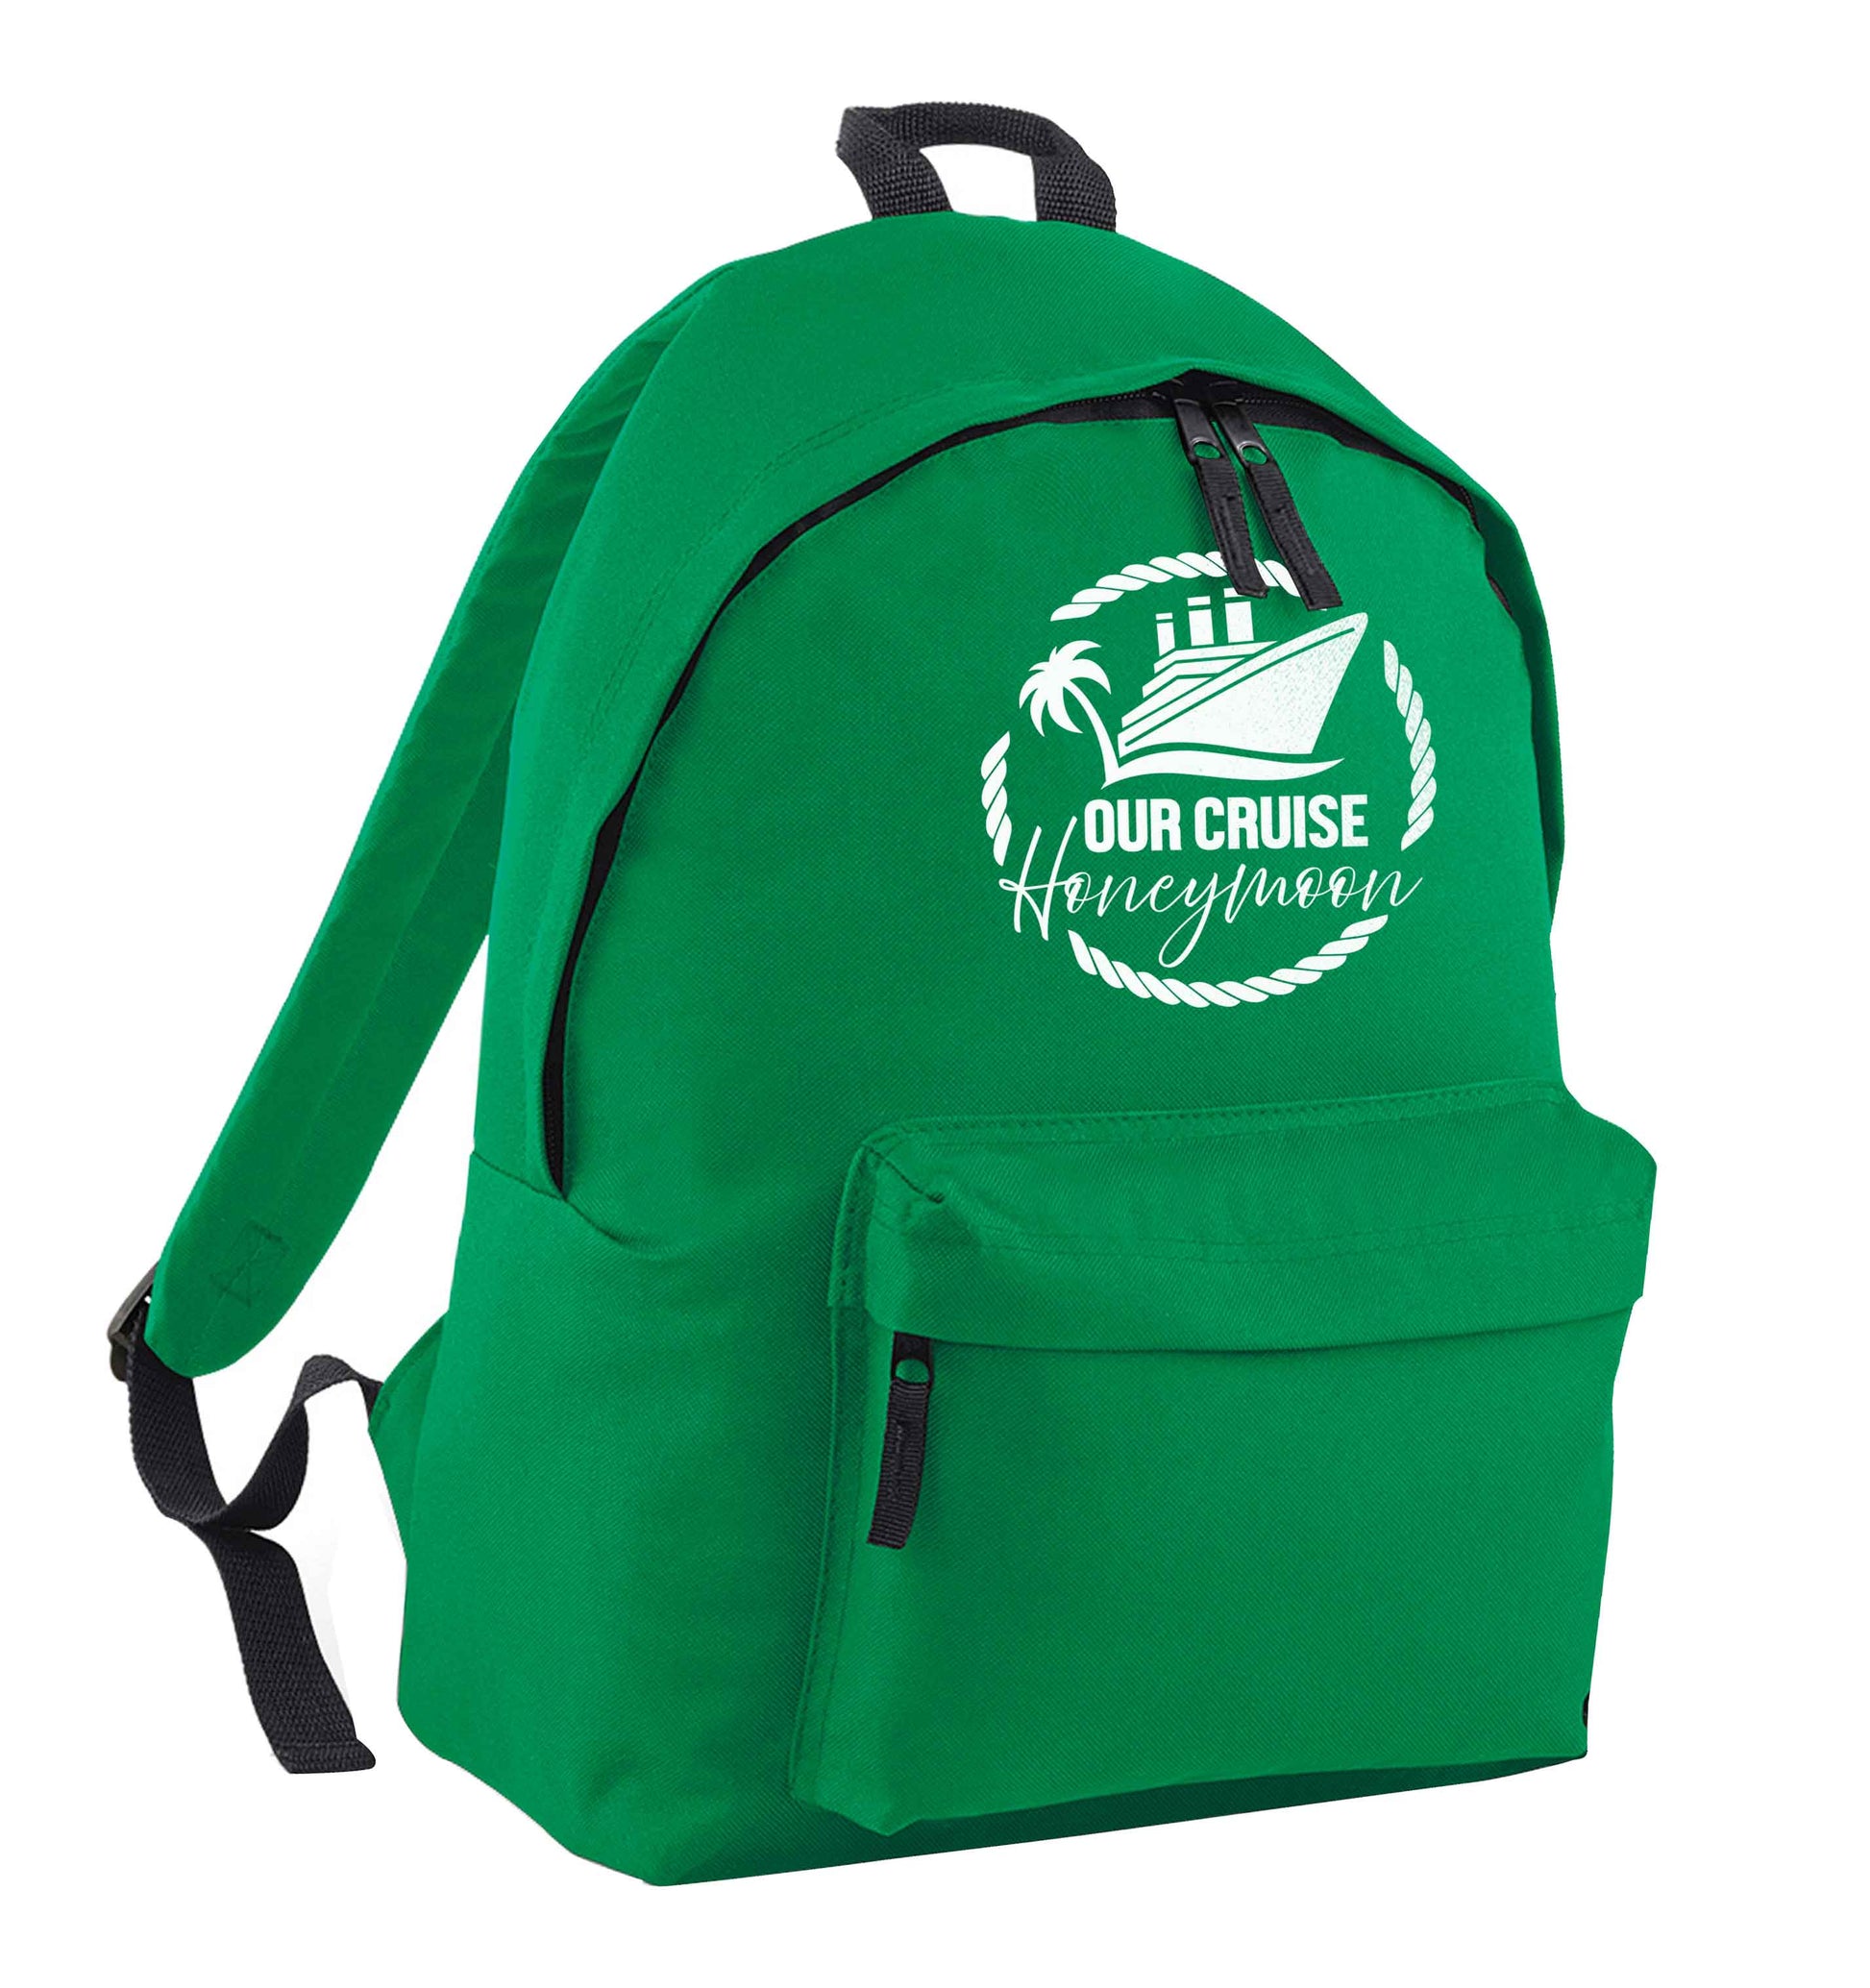 Our cruise honeymoon green adults backpack